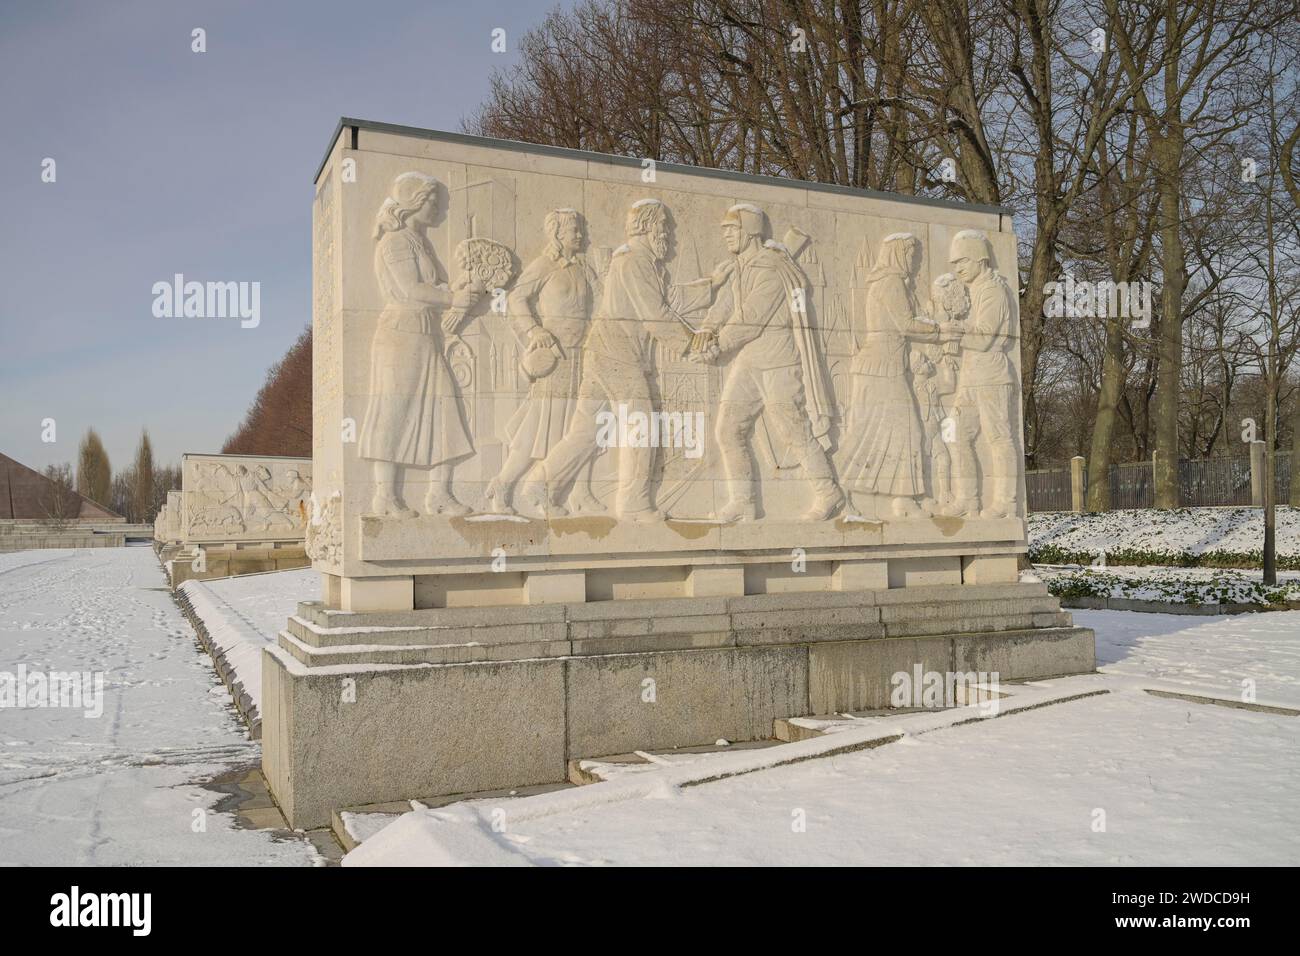 Sarcophagus with stone relief, thanks of the civilian population to the army, Soviet memorial, winter, Treptower Park, Treptow, Treptow-Koepenick Stock Photo